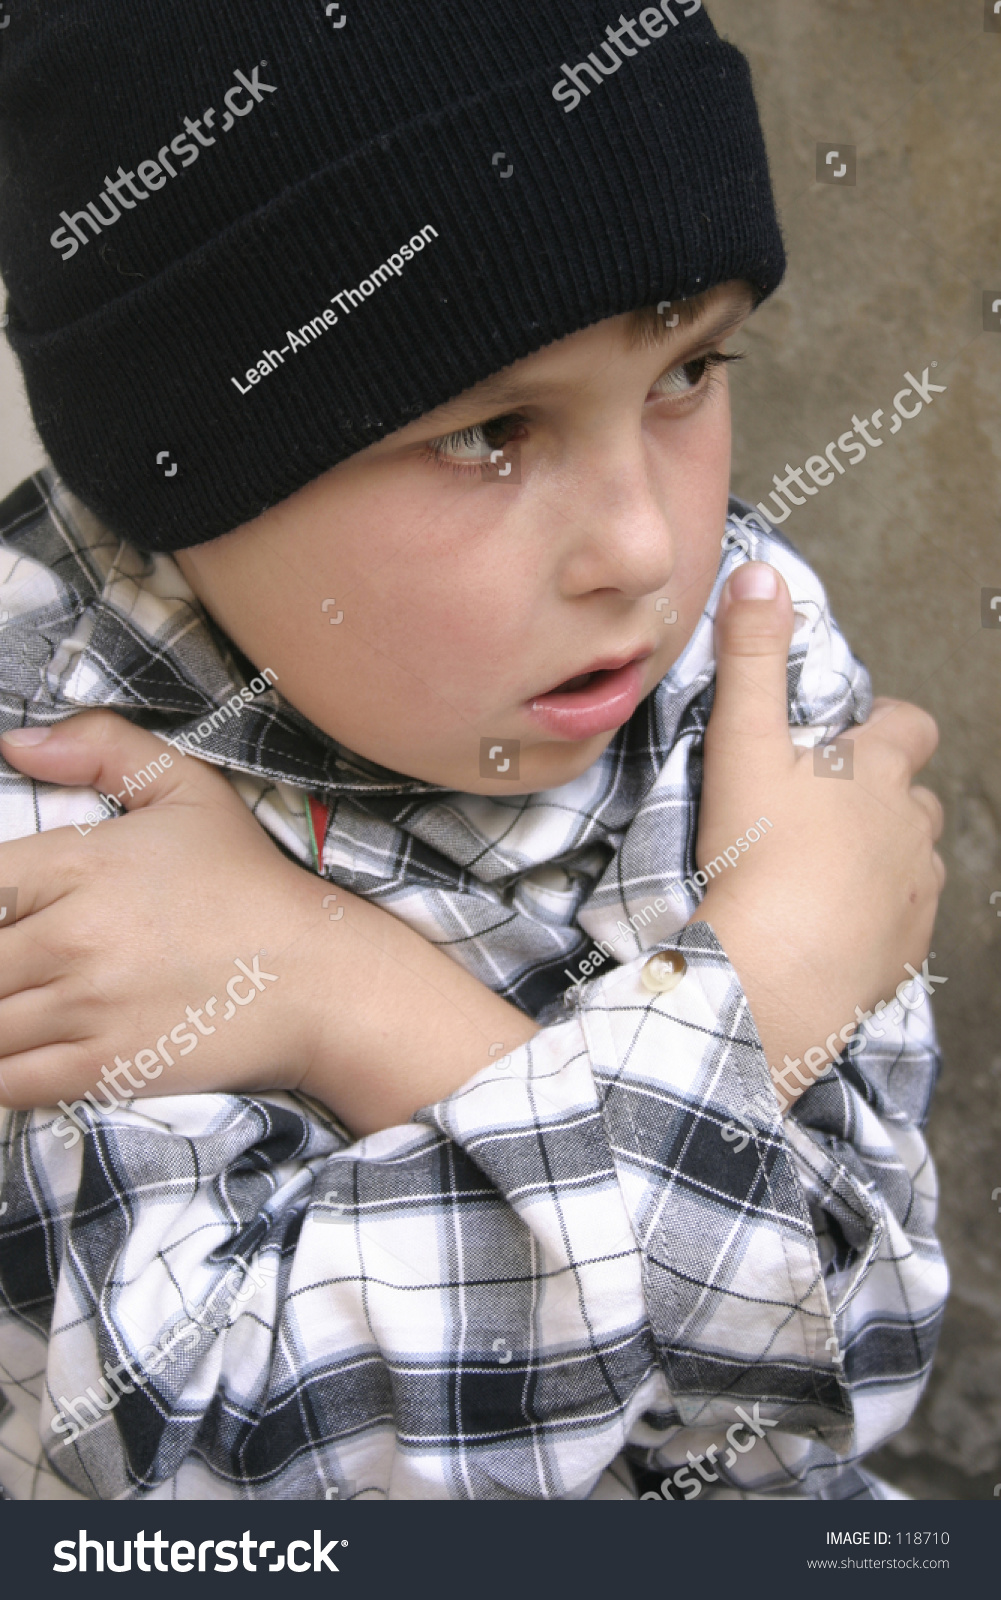 Save to a lightbox - stock-photo-a-homeless-boy-cold-and-lonely-part-of-a-kids-on-the-street-series-118710